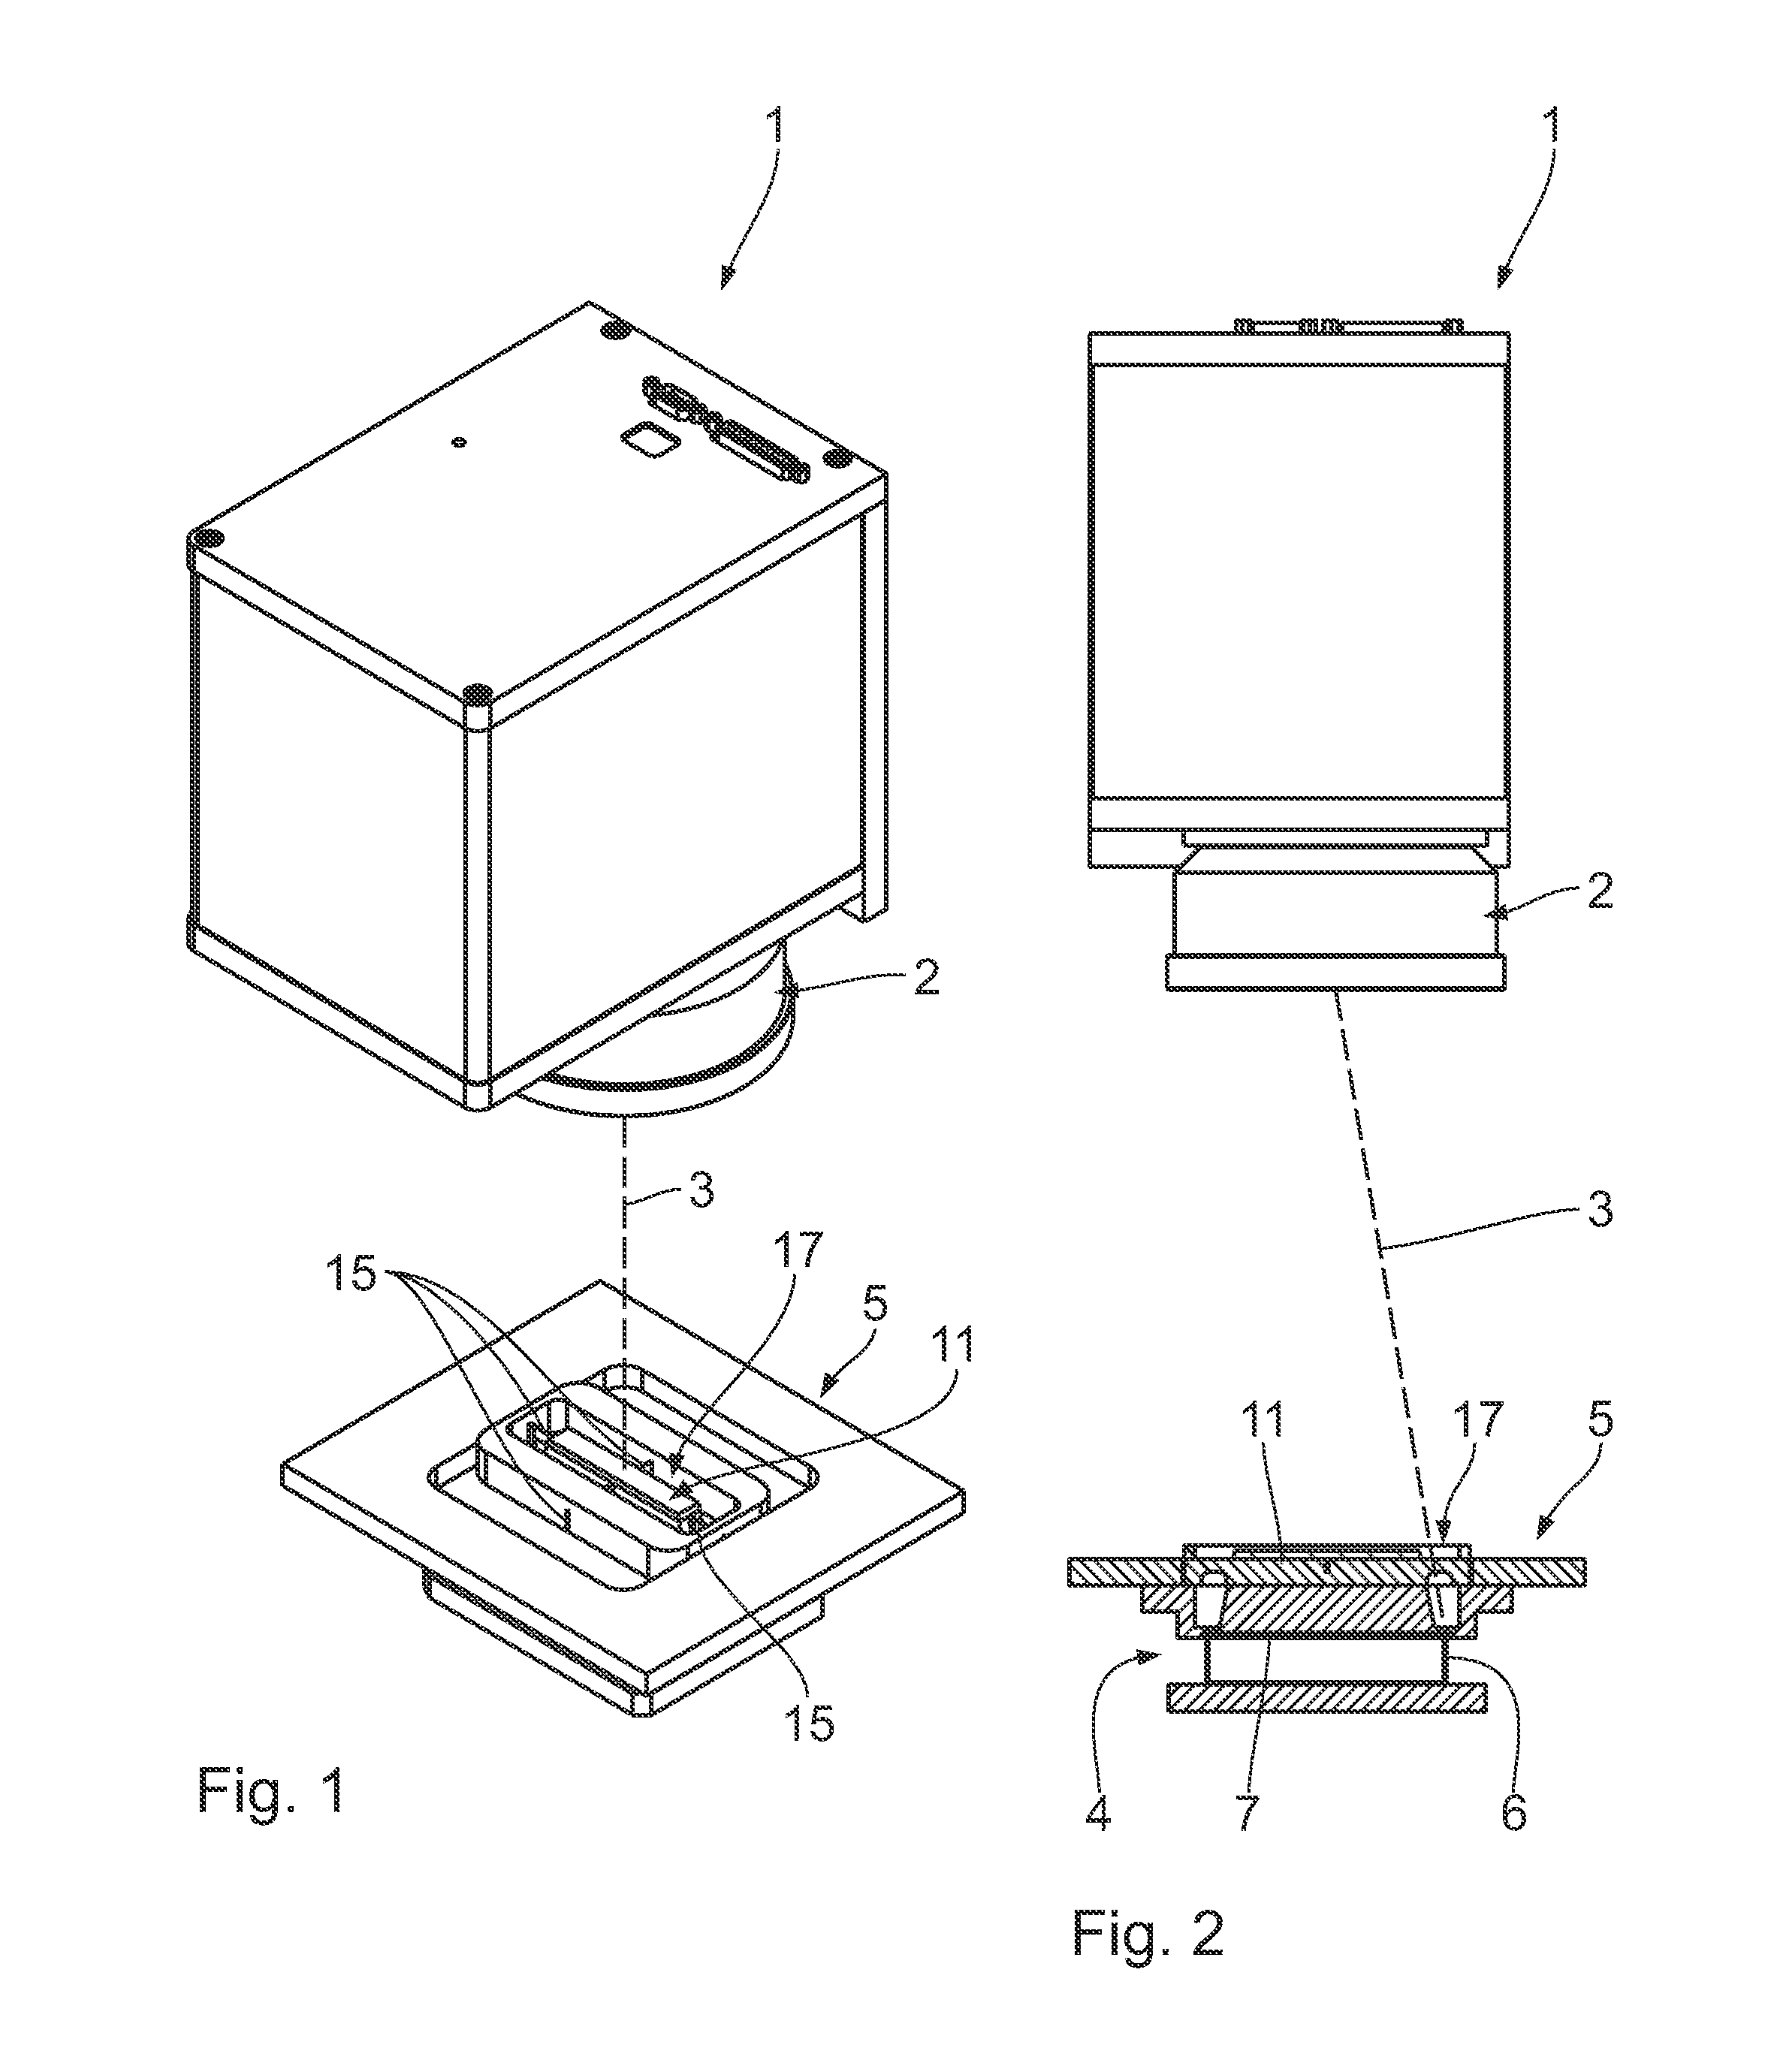 Clamping apparatus for clamping at least two component parts